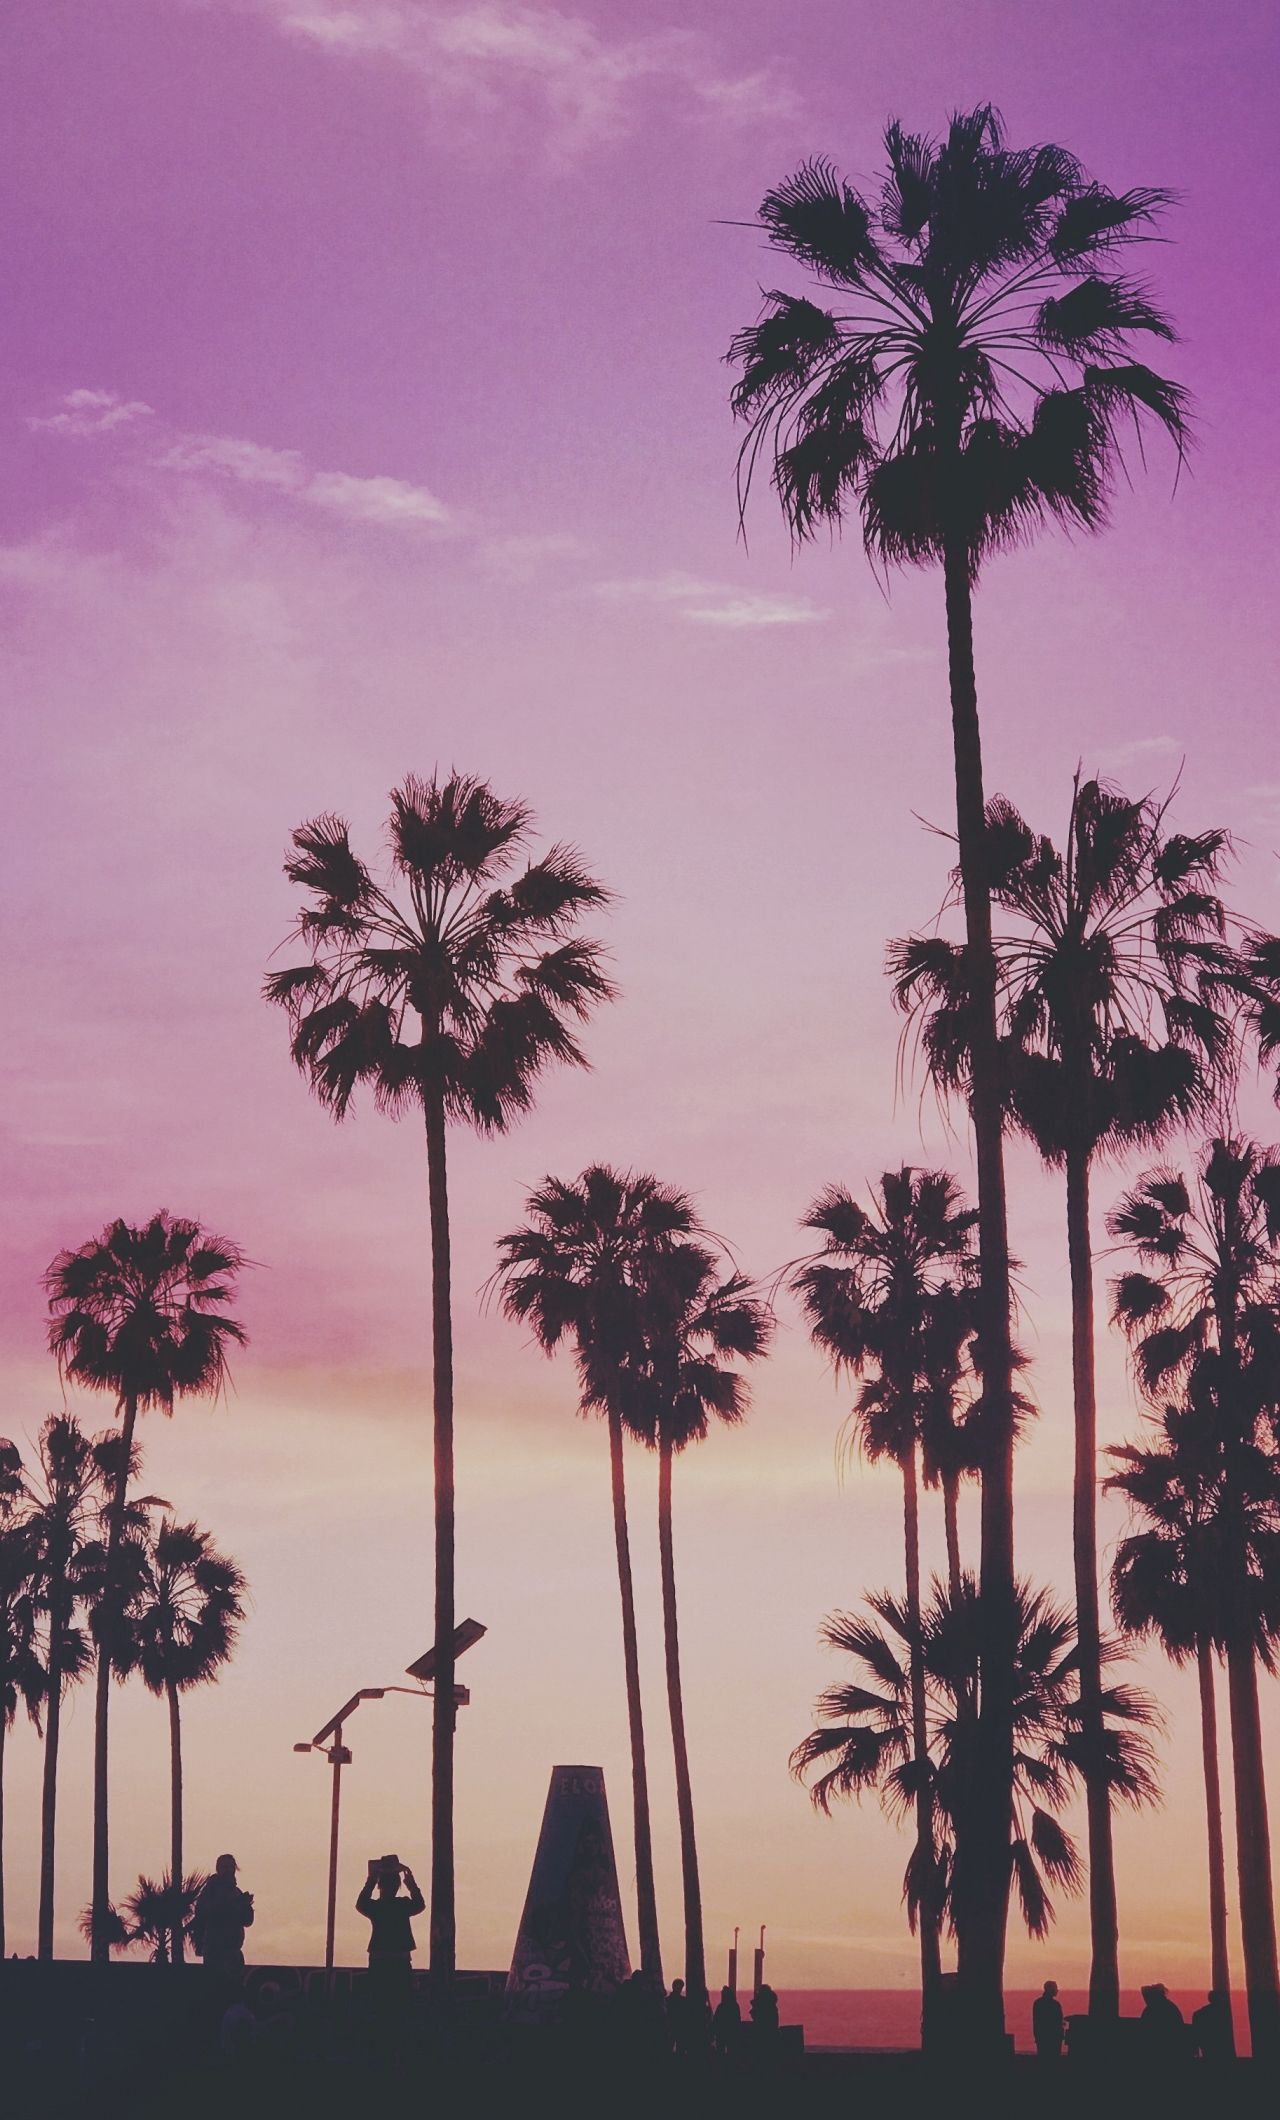 Download 1280x2120 wallpaper tropical, palm trees, miami sunset, iphone 6 plus, 1280x2120 HD image, background, 19176